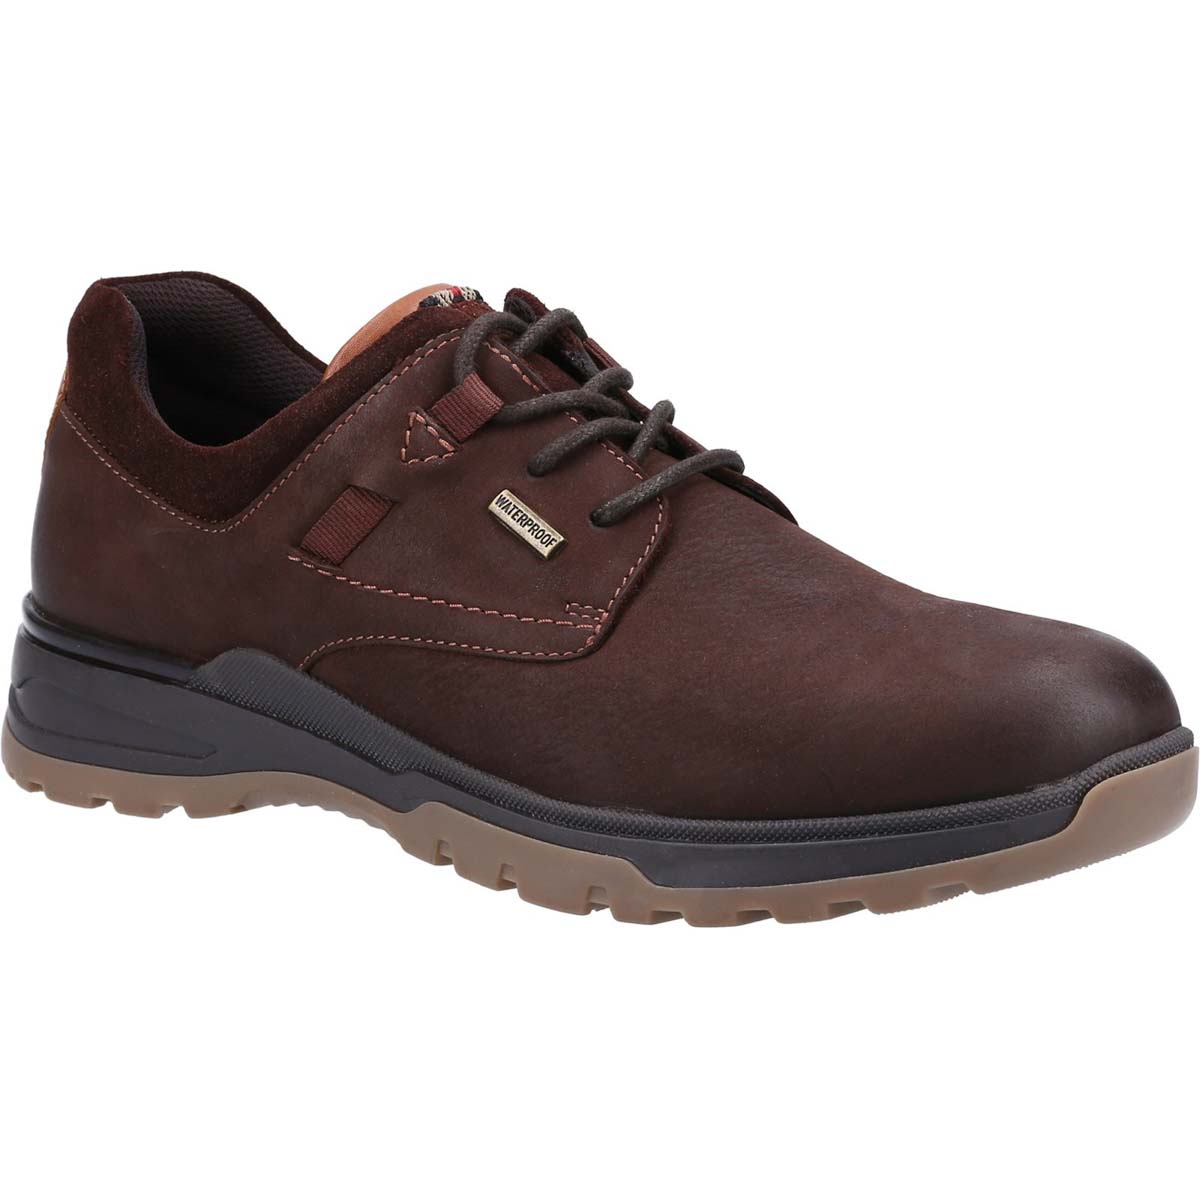 Hush Puppies Pele Lace Up Brown nubuck Mens comfort shoes 35665-66532 in a Plain Nubuck Leather in Size 11